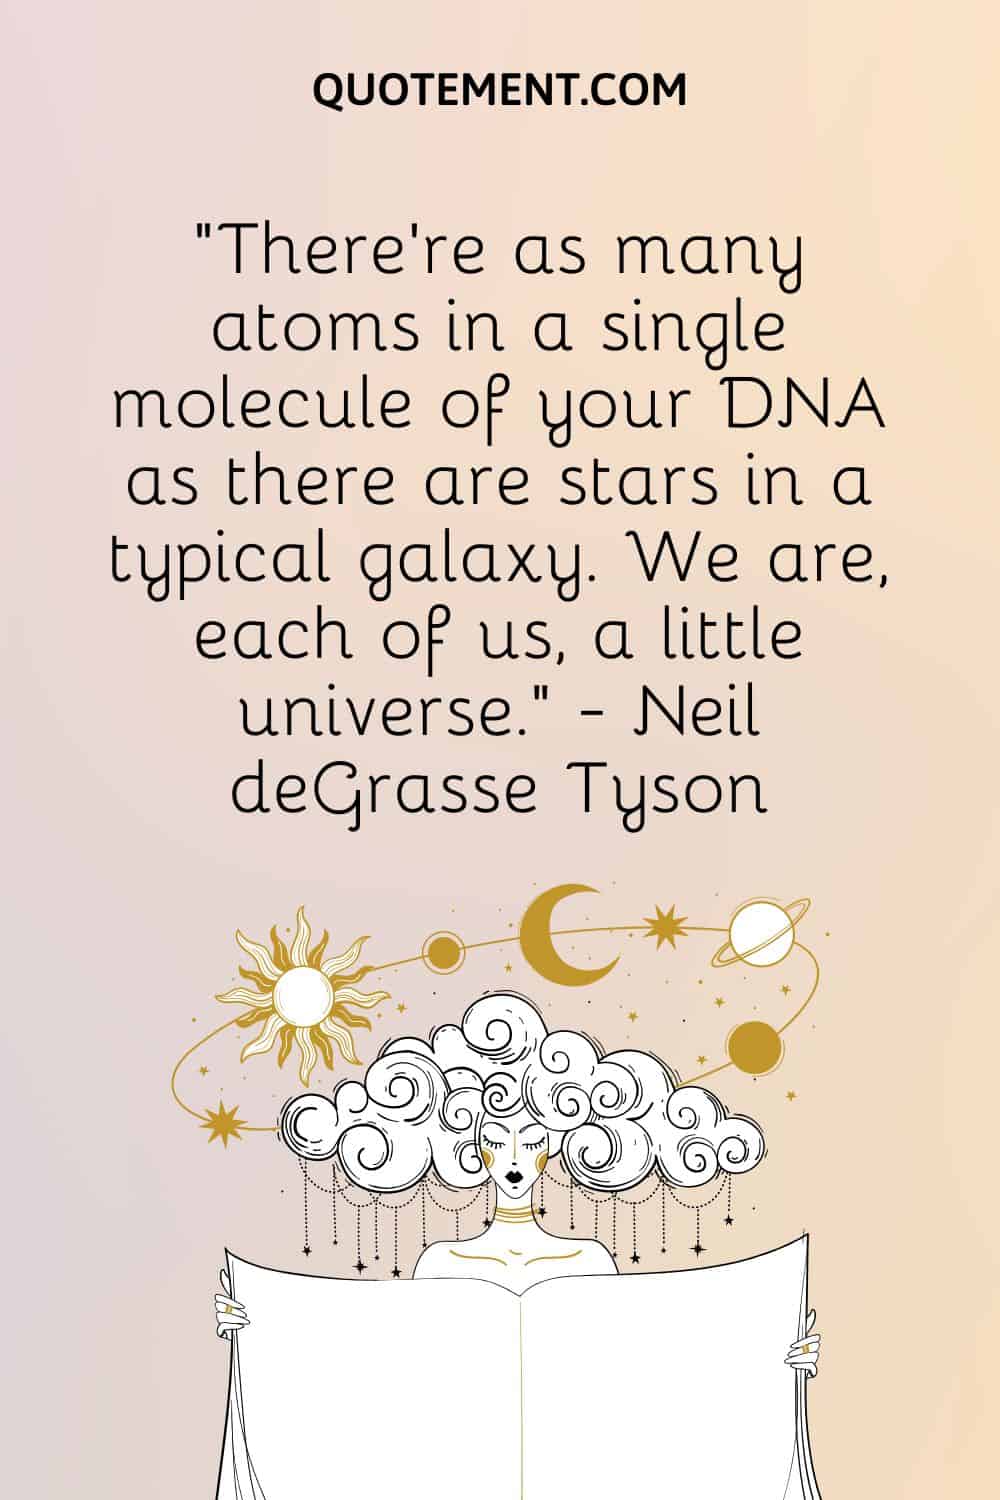 There’re as many atoms in a single molecule of your DNA as there are stars in a typical galaxy